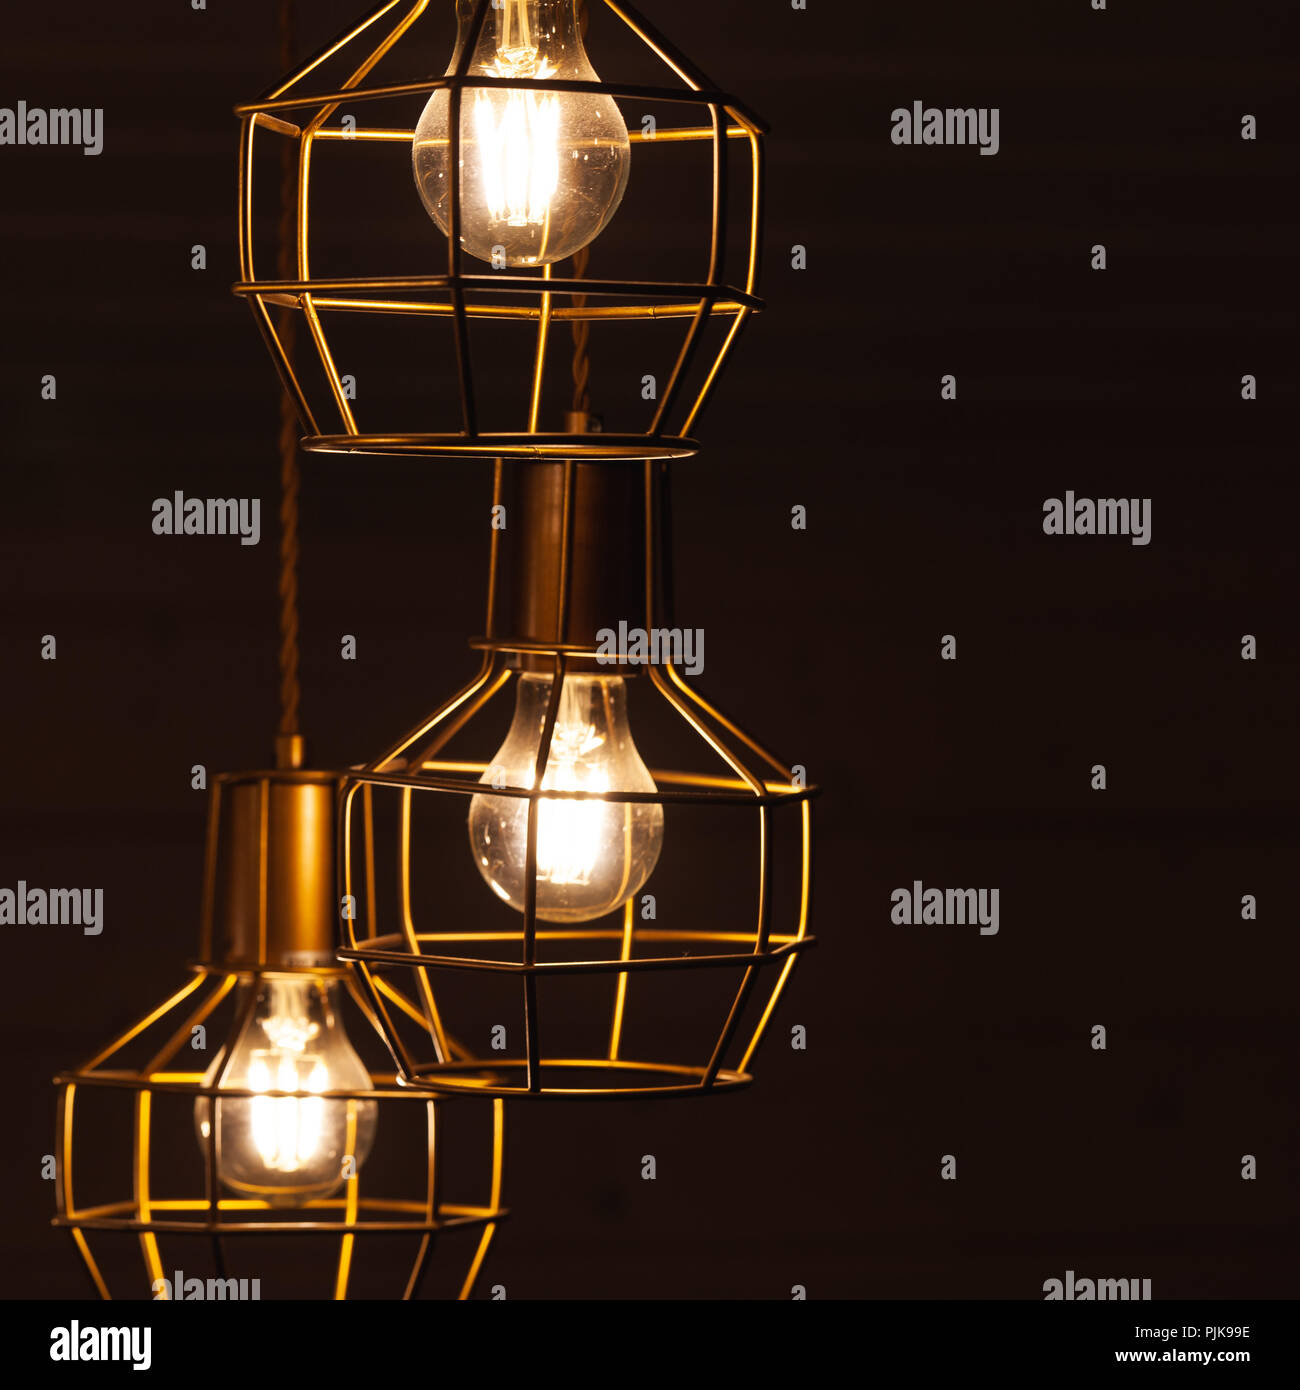 Ceiling chandelier with hanging three bulb lamps, yellow LED lighting elements covered with metal wire frame lampshades, square framed photo with sele Stock Photo